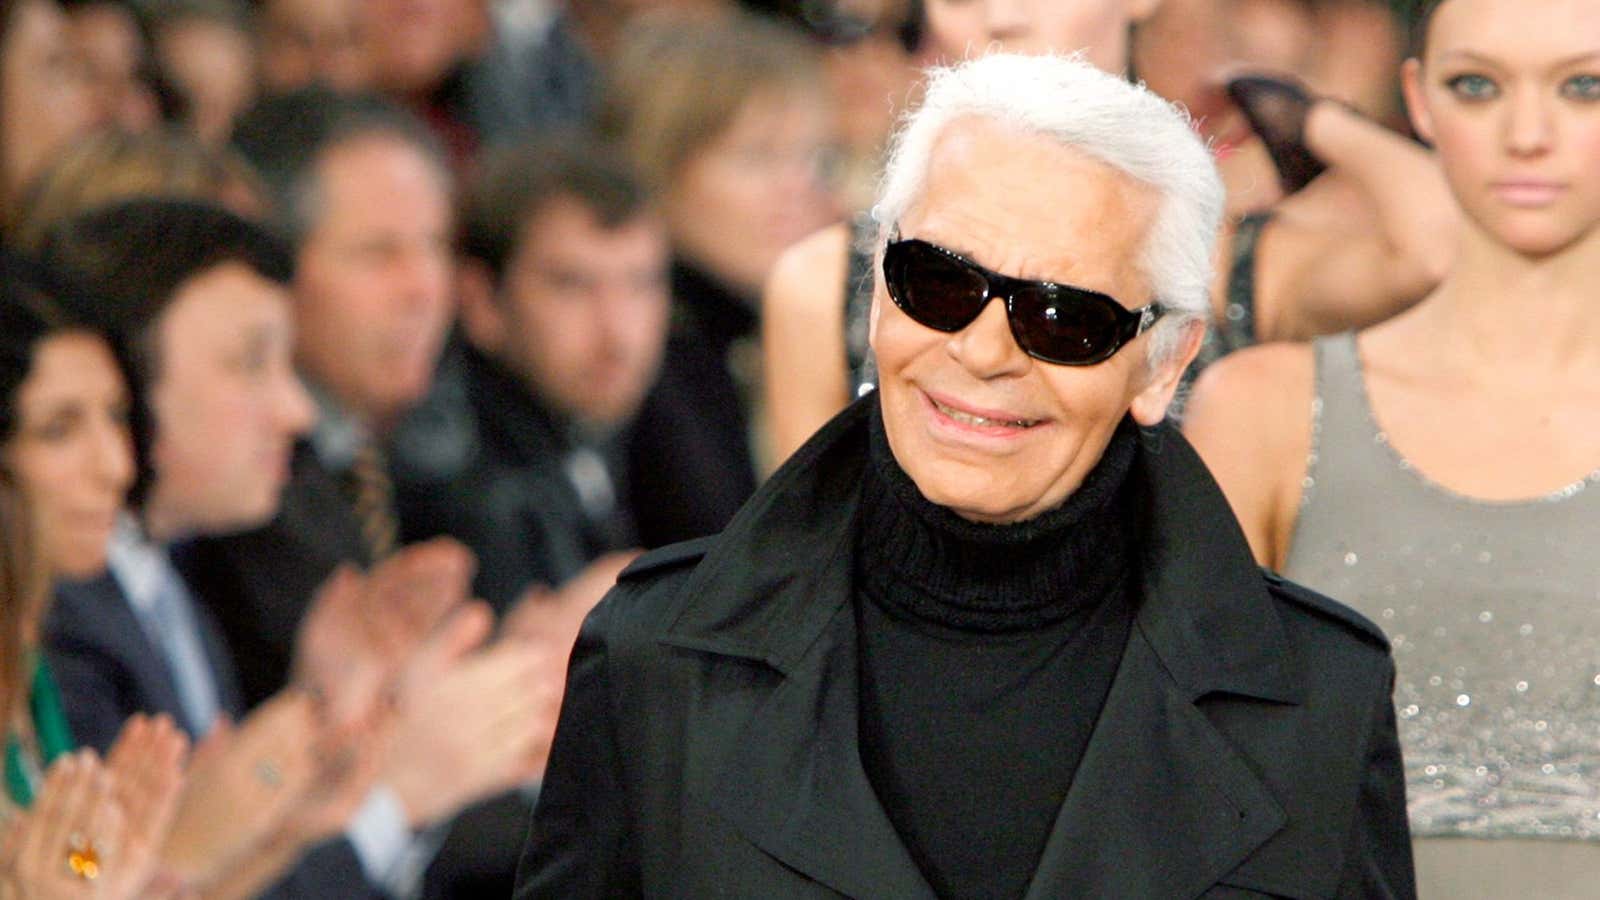 Karl Lagerfeld was hilarious, and he was in on the joke